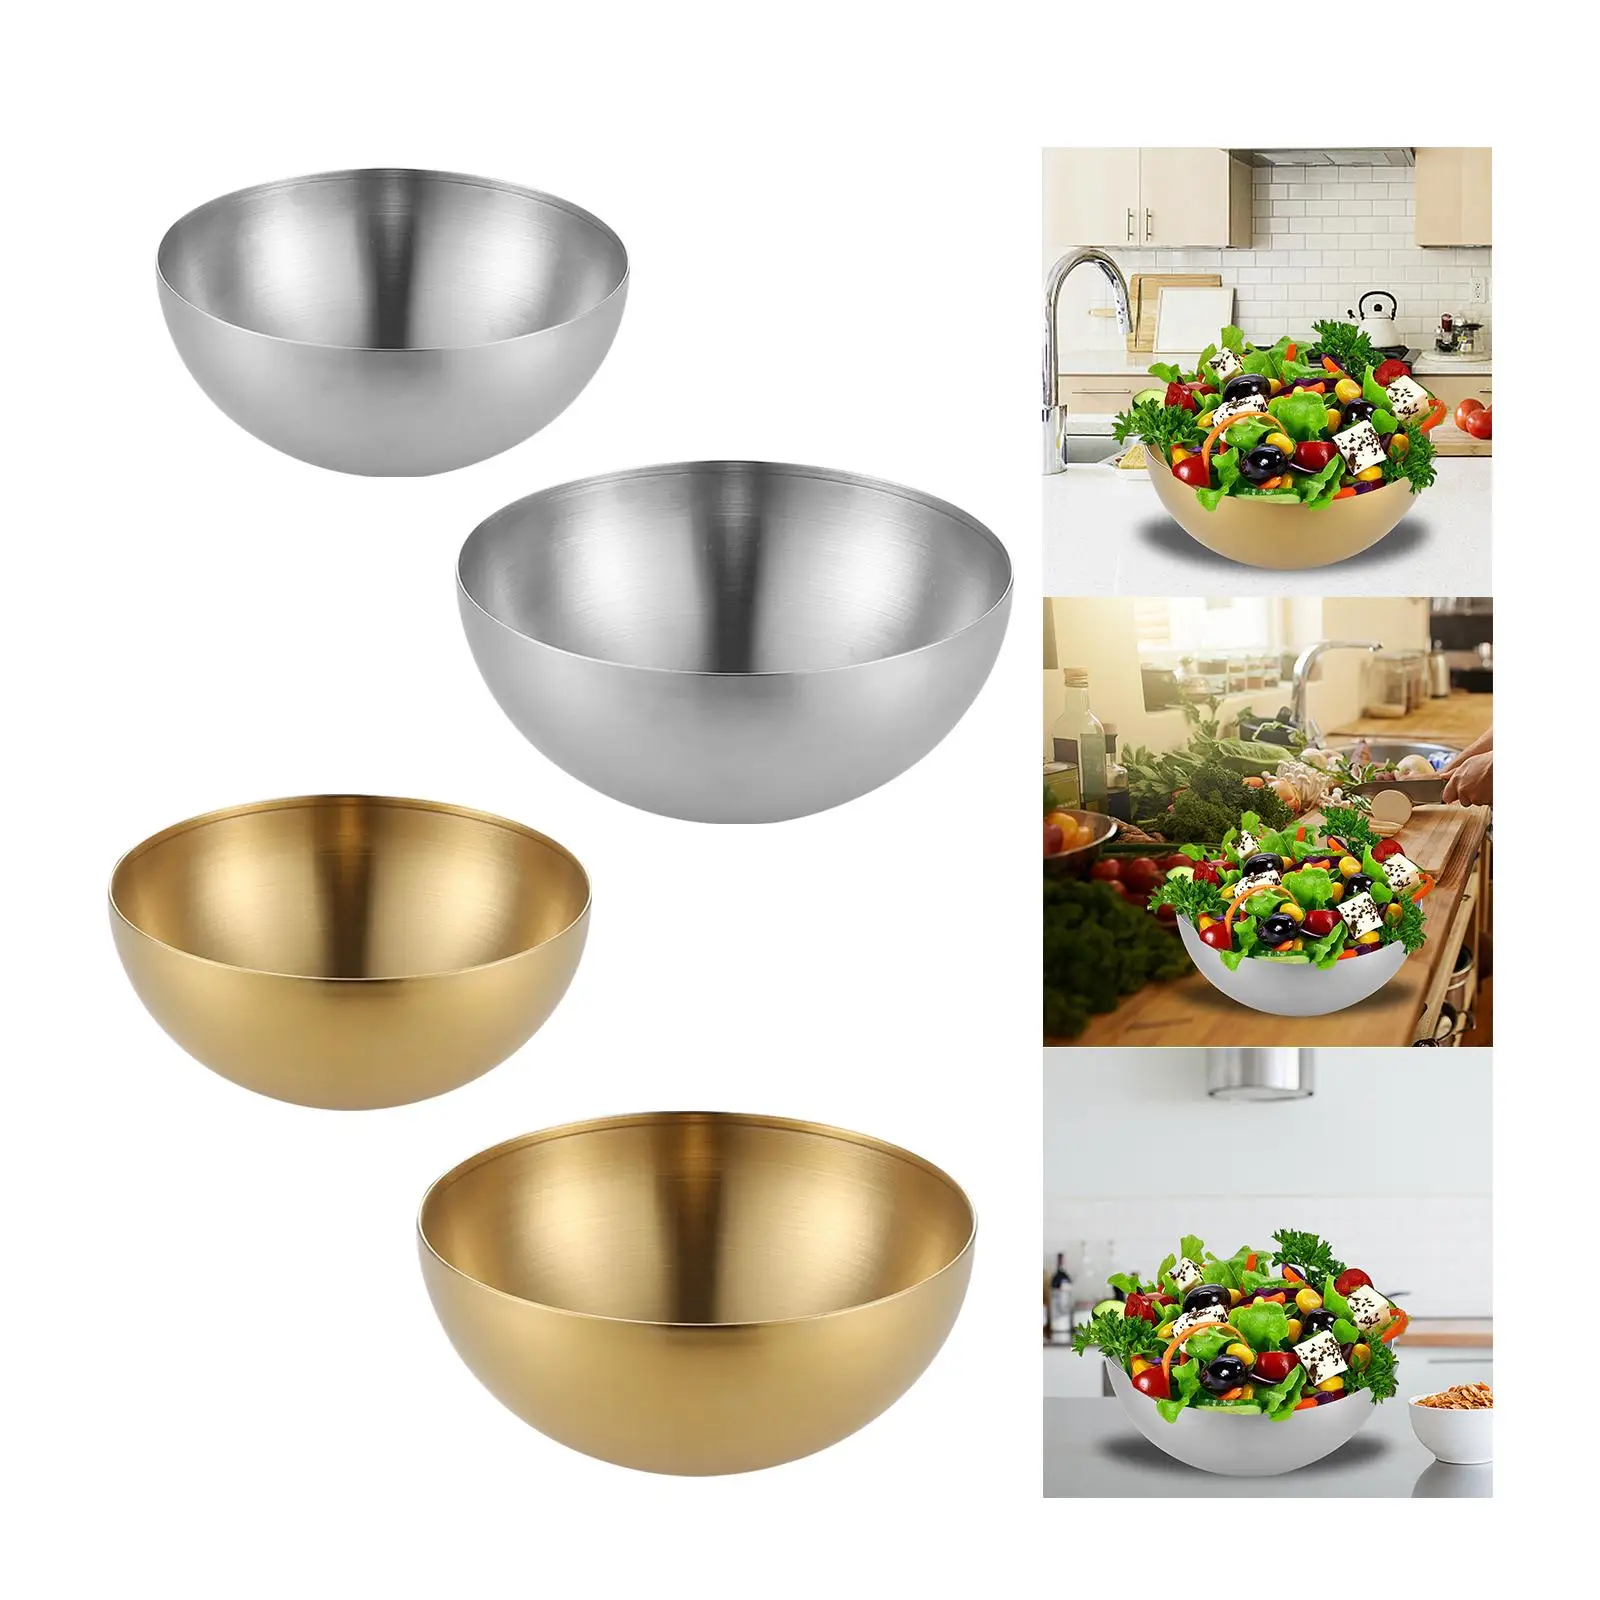 Stainless Steel Mixing Bowls Food Storage Organizers Lightweight Salad Bowls Soup Bowls Multifunction Metal Bowls for Cooking